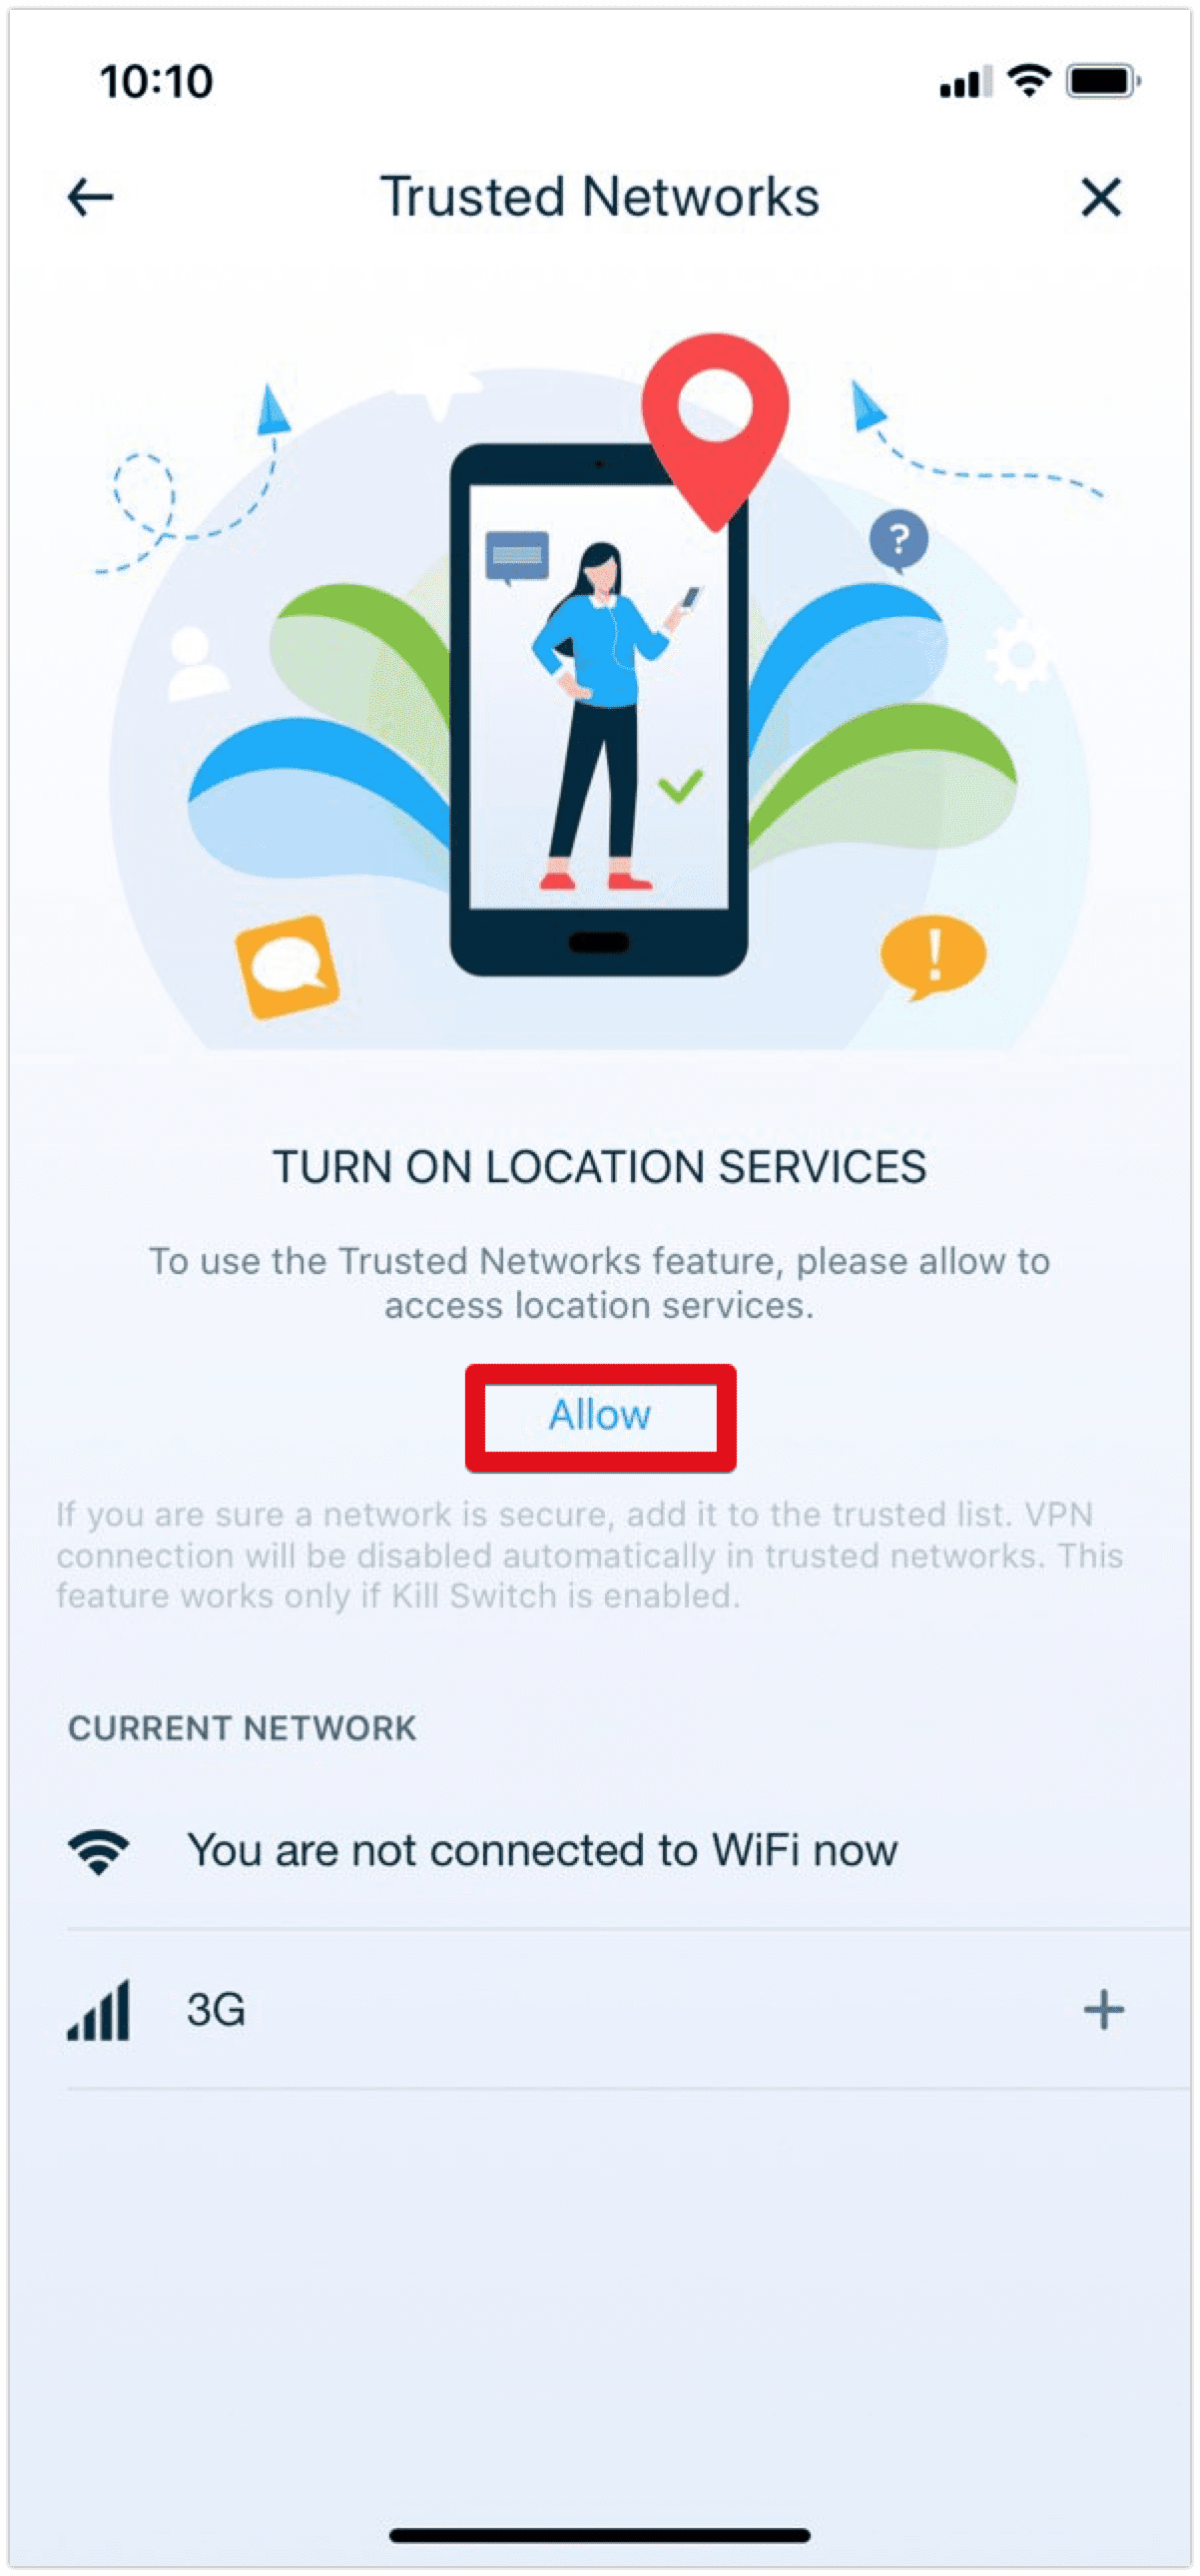 Tap Allow to turn on Location Services